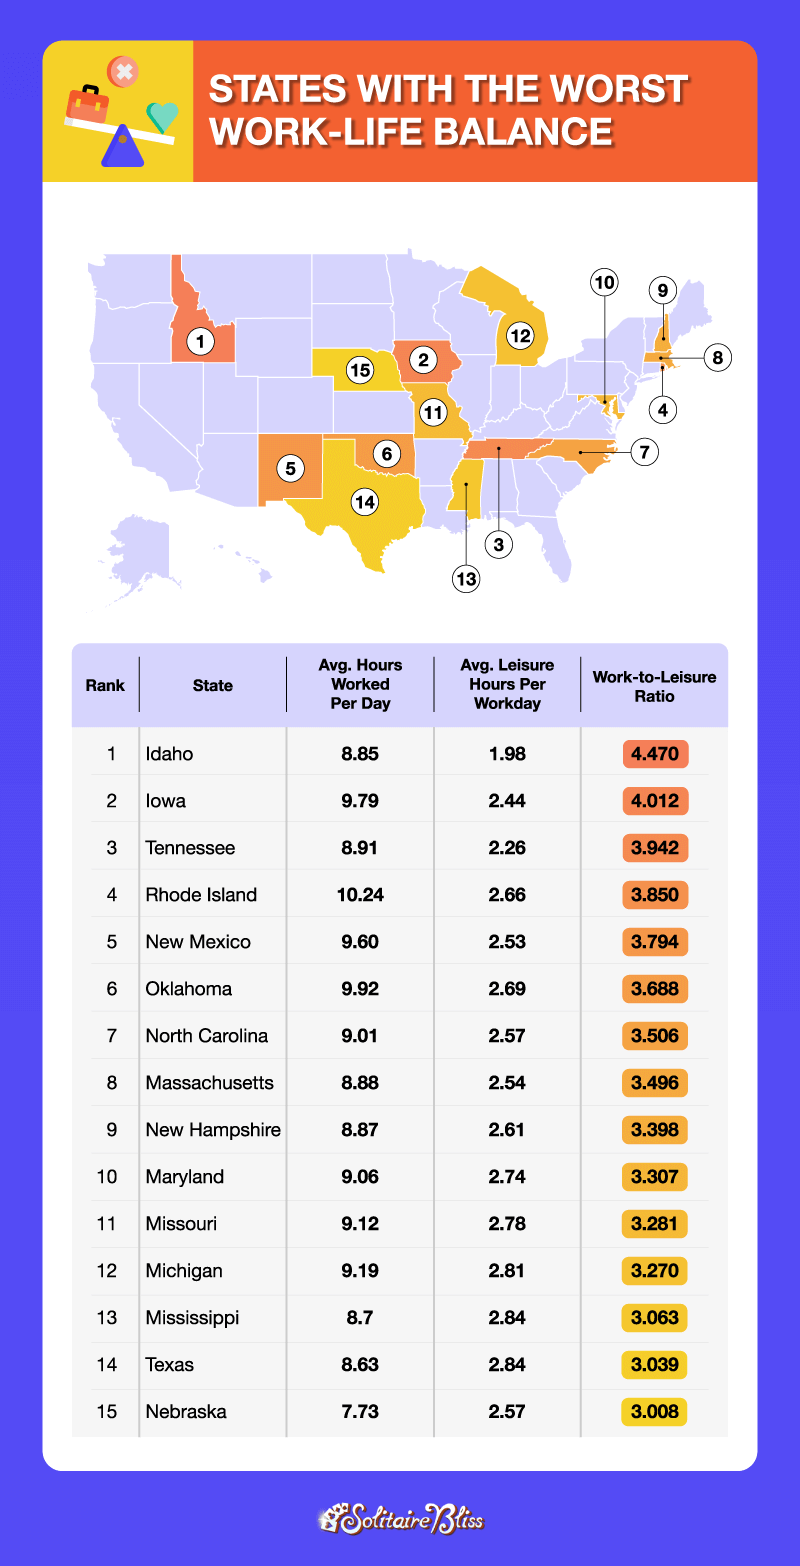 states with the worst work-life balance